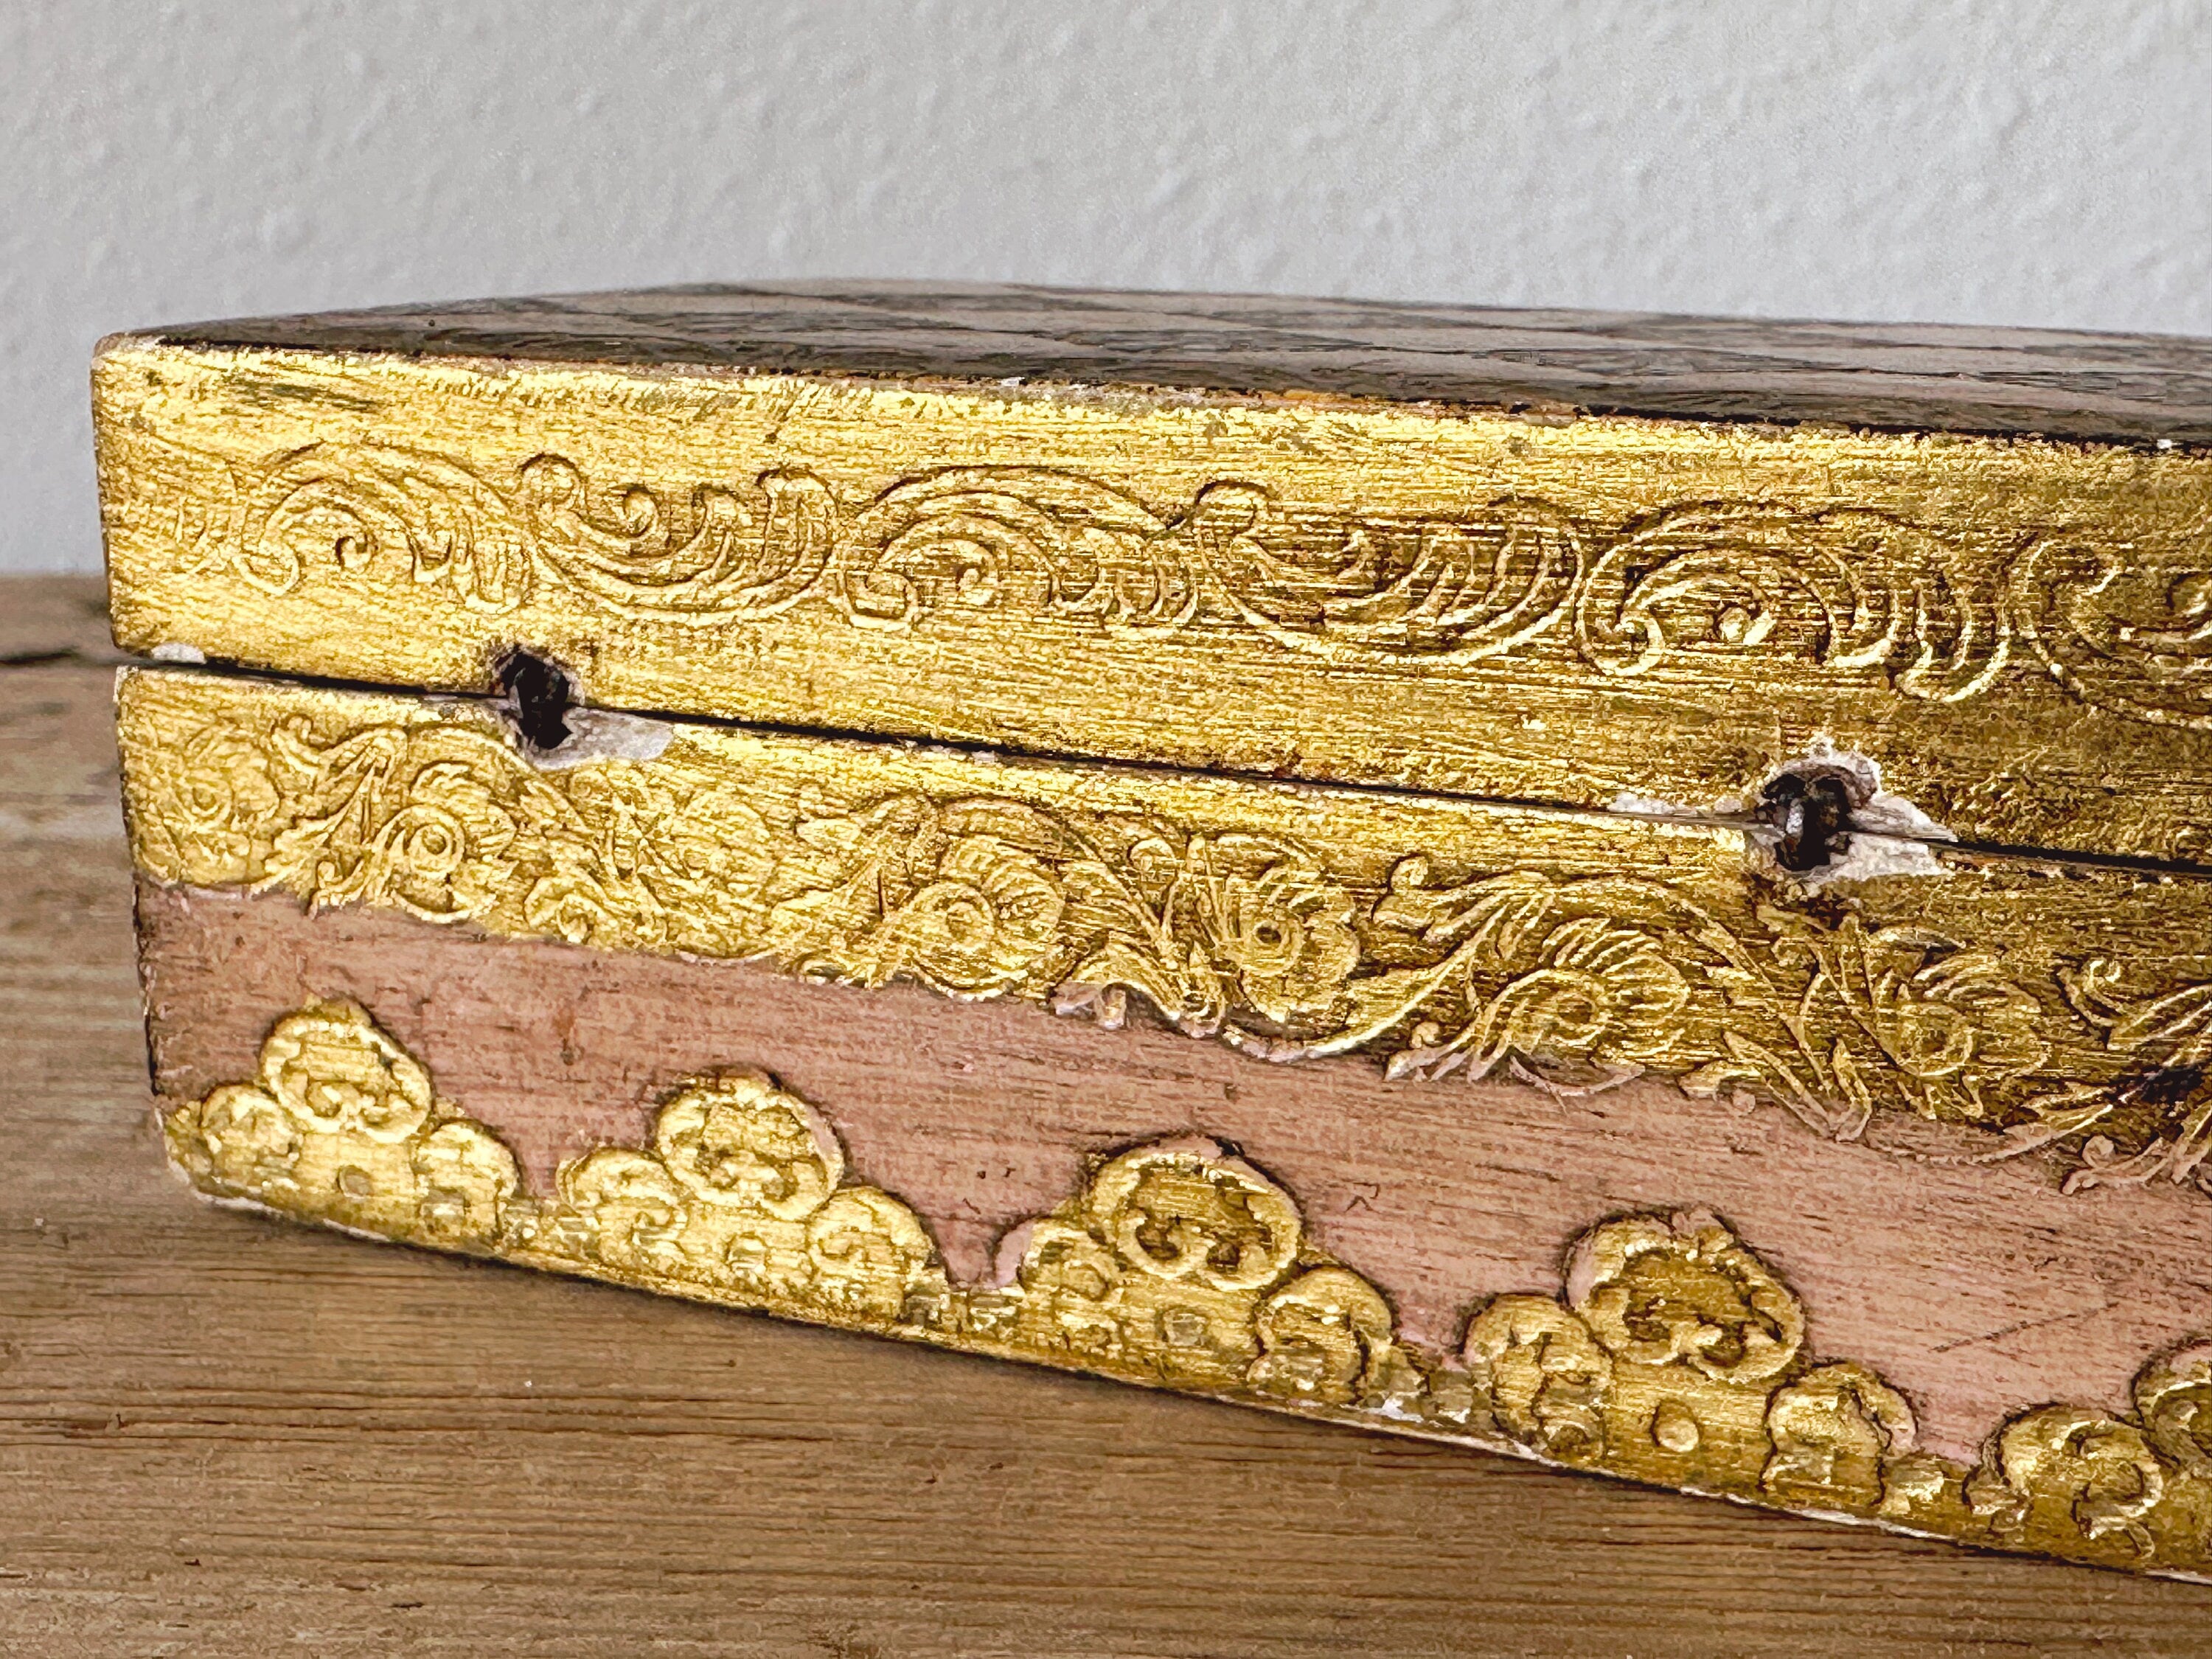 Small Vintage Italian Florentine Gilt-Wood Footed Jewelry Box | Gold and Pink Distressed Wooden Trinket Box | Bedroom Vanity | Gift for Her